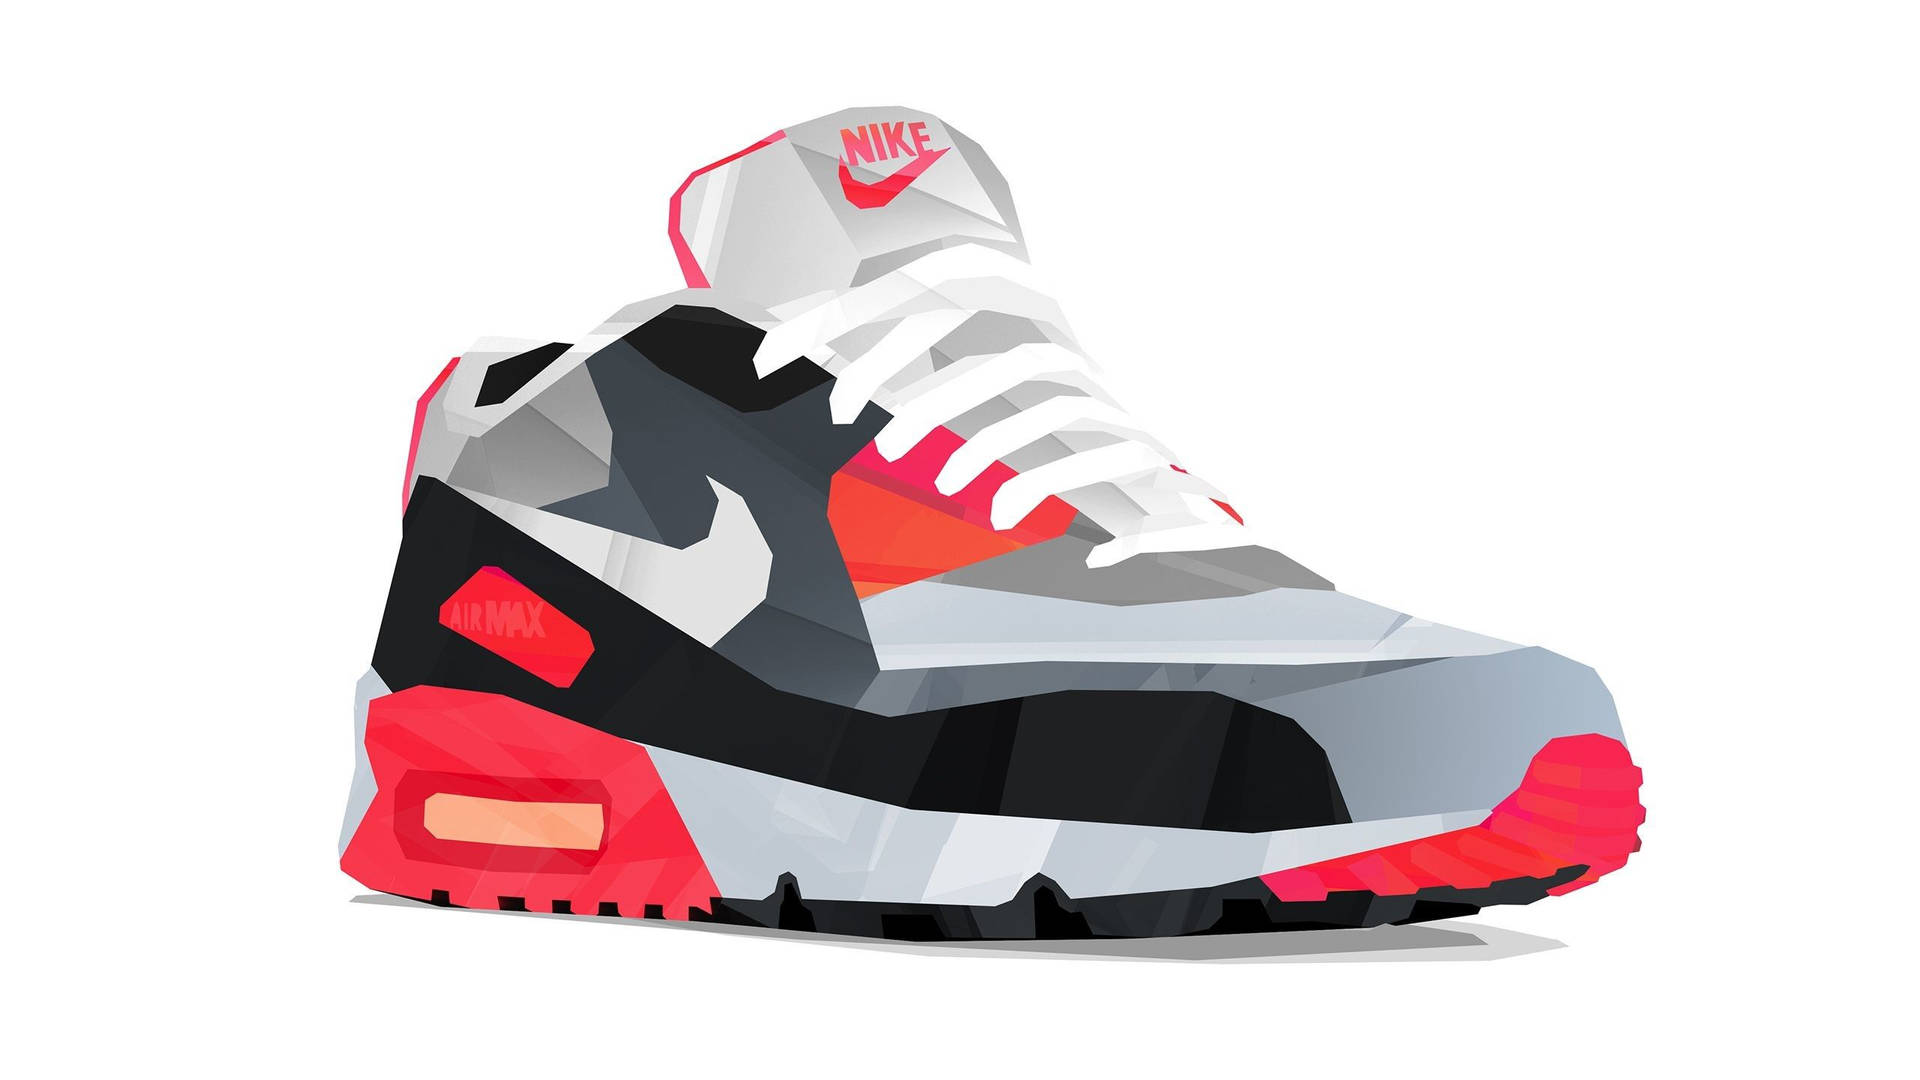 Sneaker Air Max 90 Vector Background